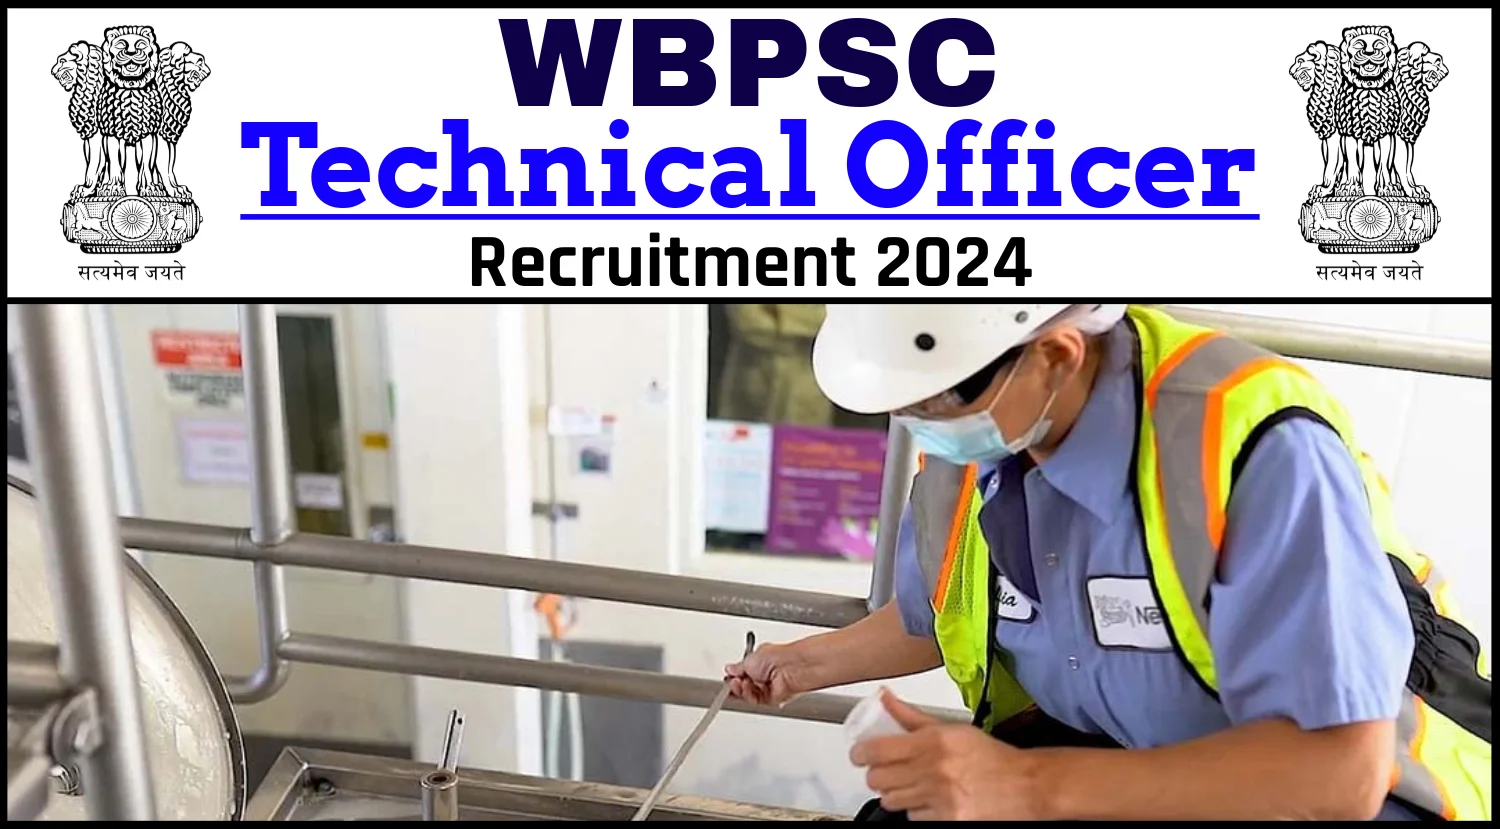 WBPSC Technical Officer Recruitment 2024 Notification Out